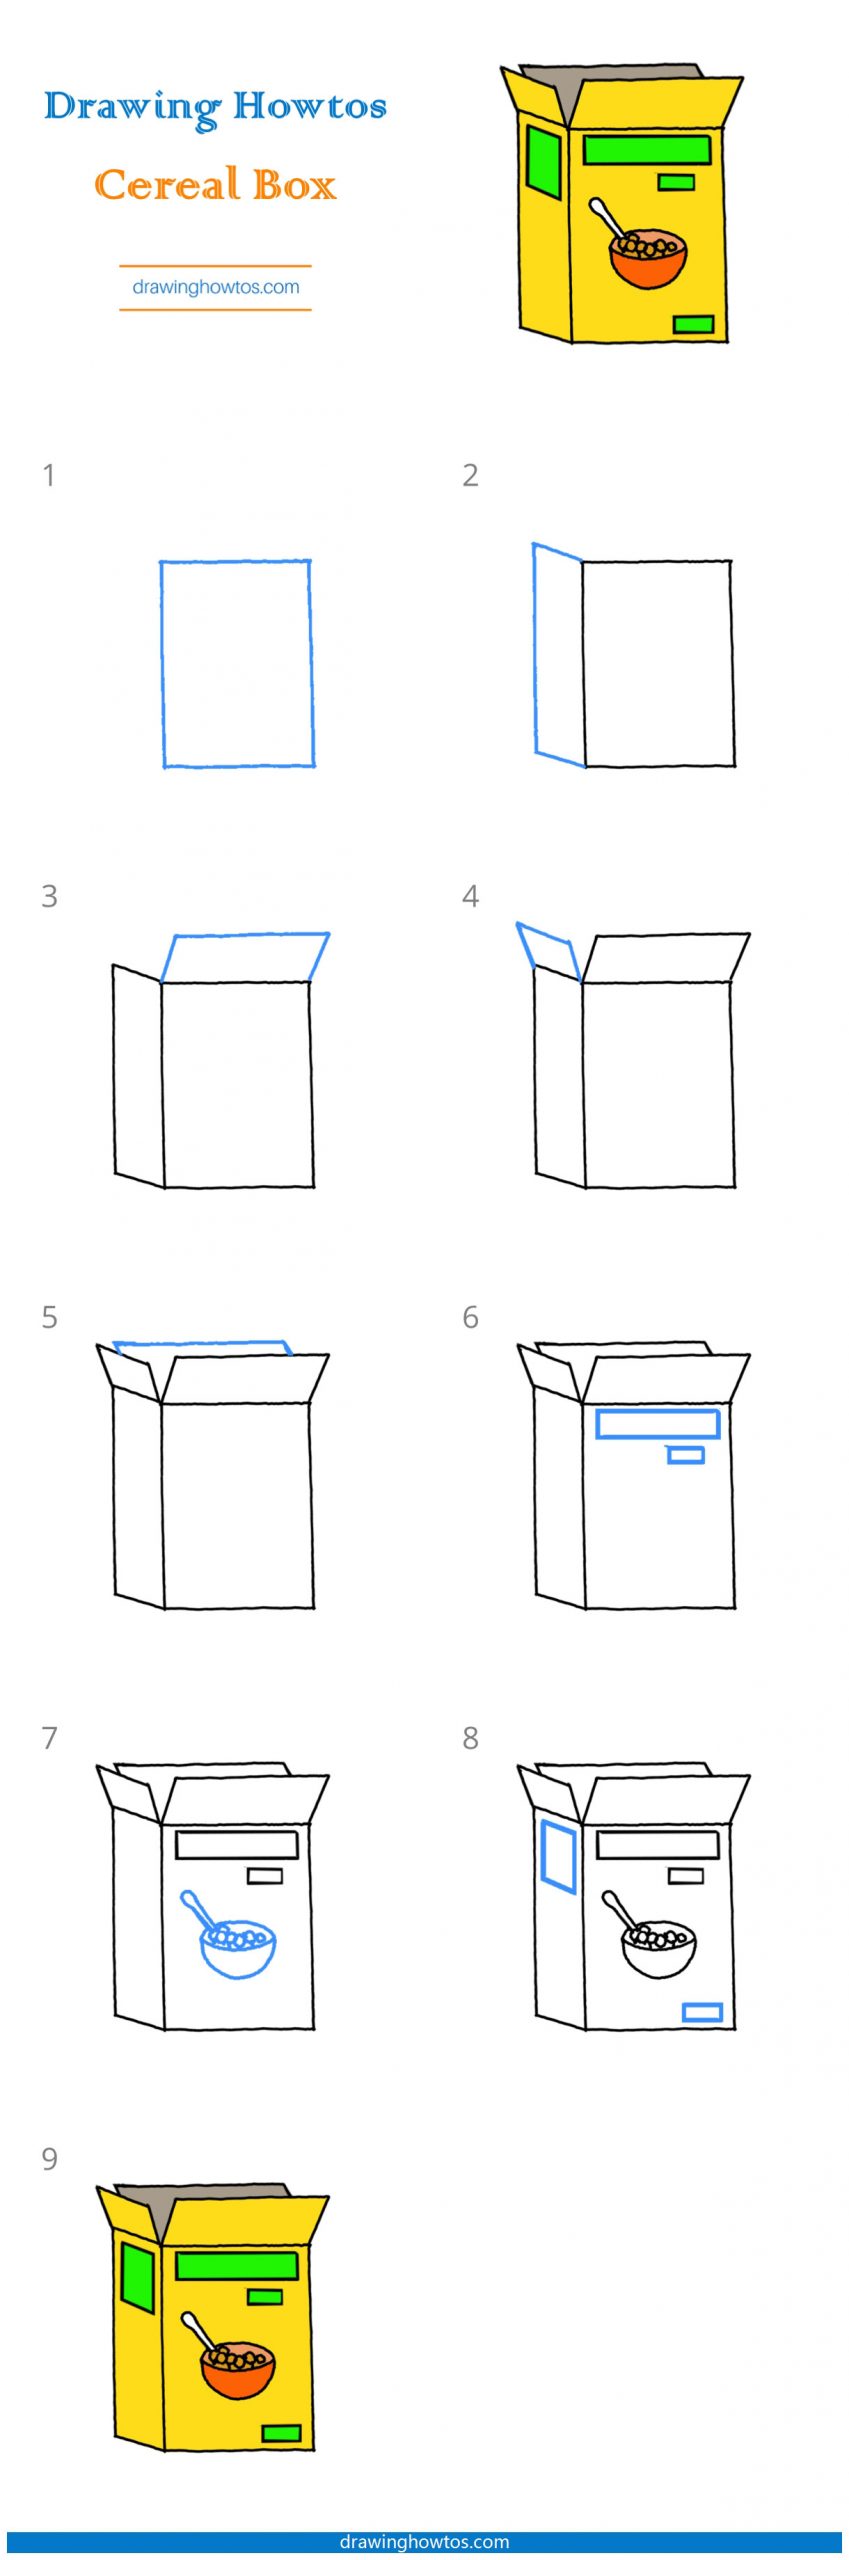 How to Draw a Cereal Box Step by Step